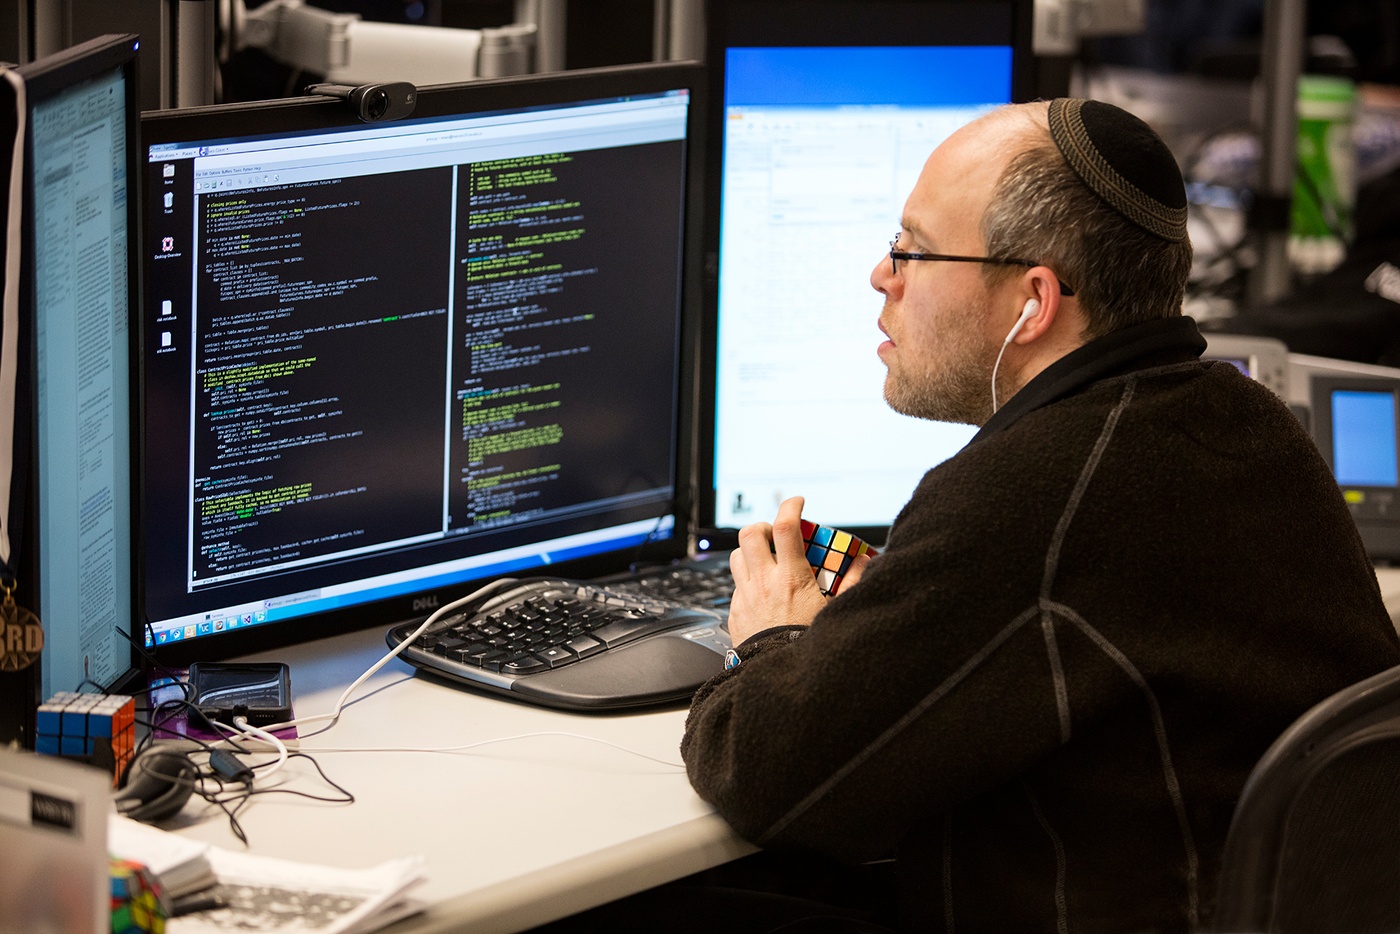 Man wearing kippah and headphones looks at code at his workstation while playing with Rubik’s Cubes.